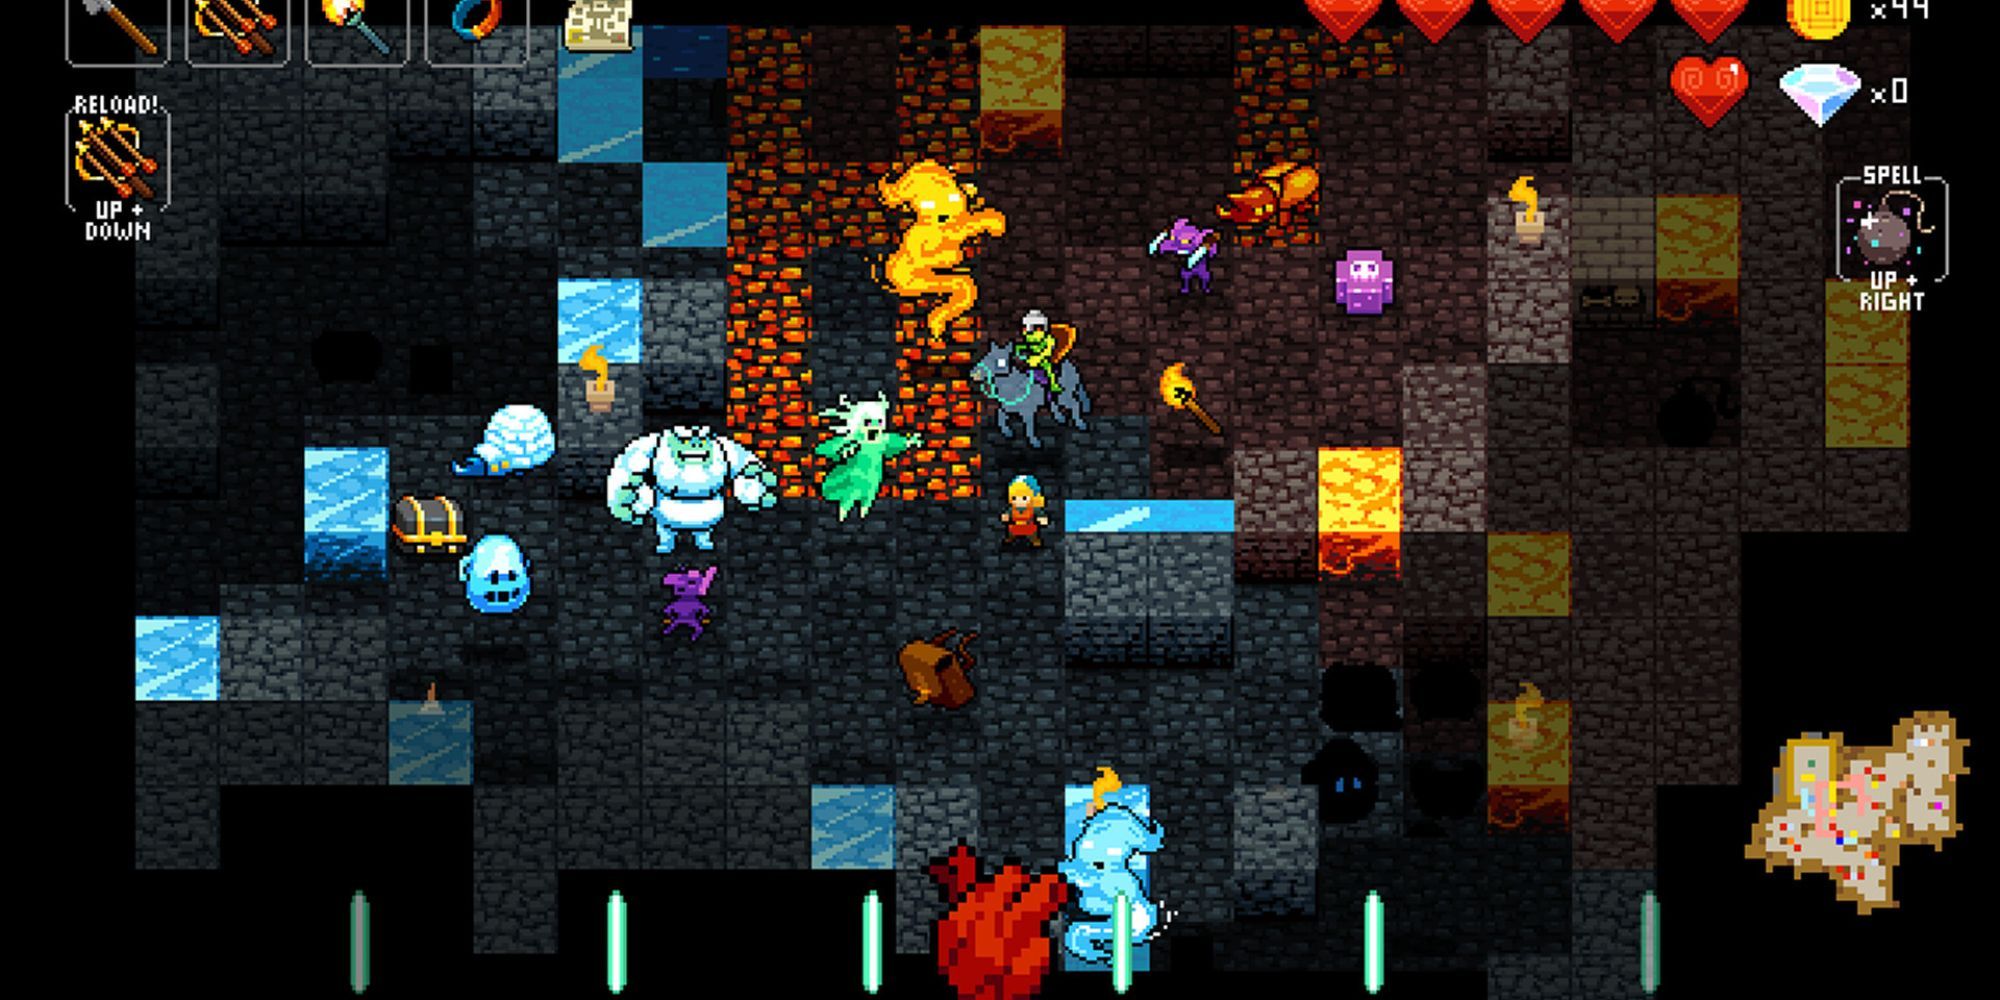 A group of enemies surround Cadence